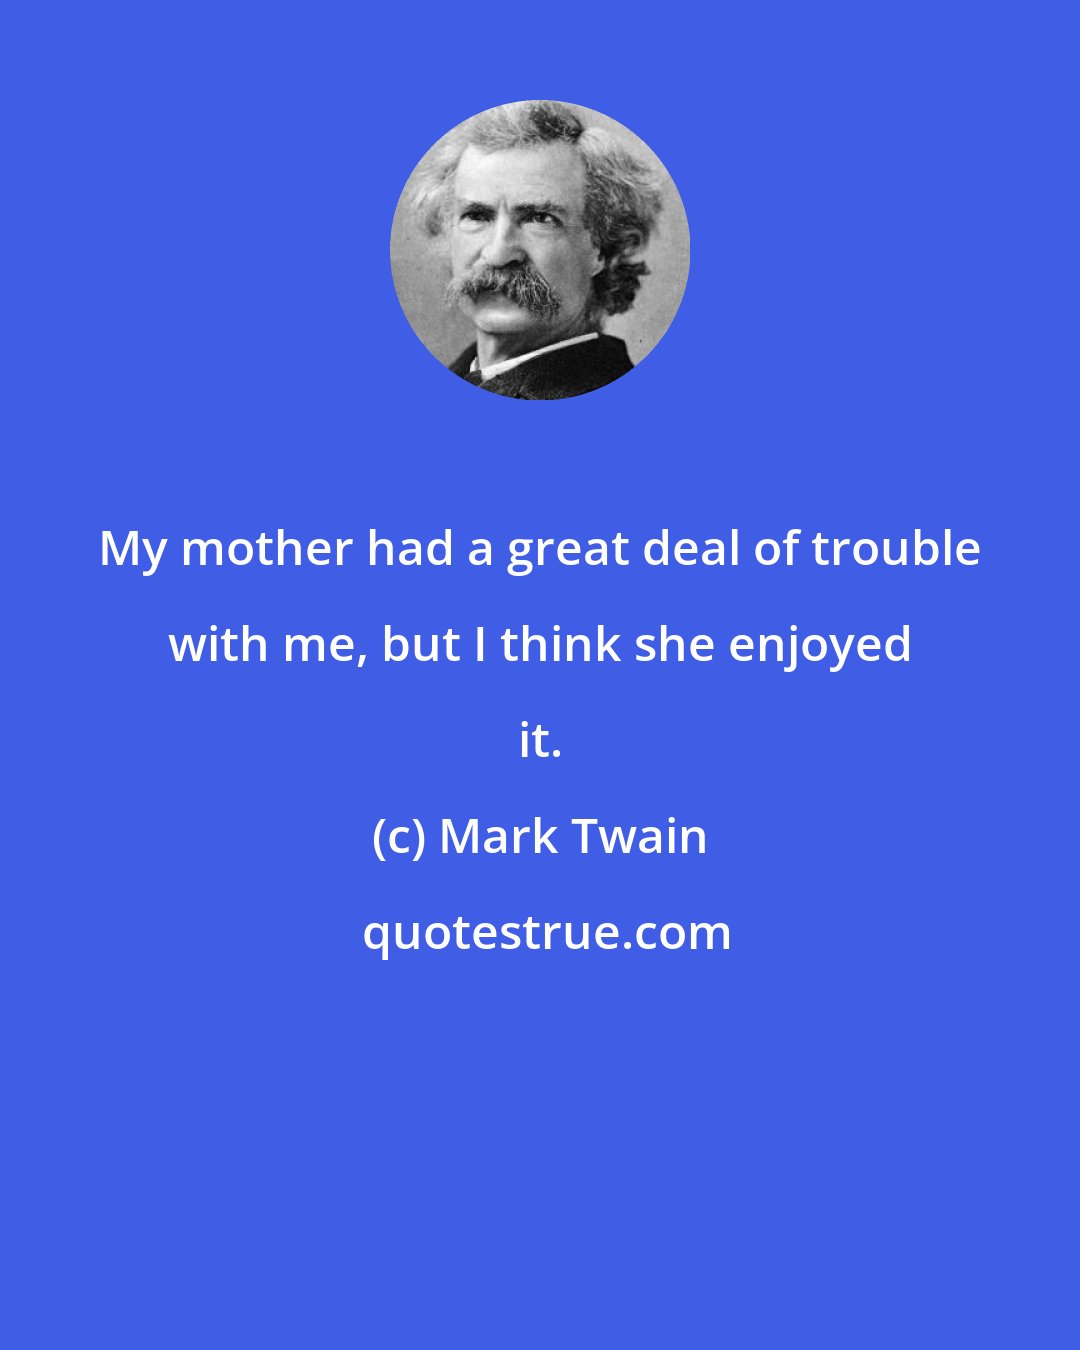 Mark Twain: My mother had a great deal of trouble with me, but I think she enjoyed it.